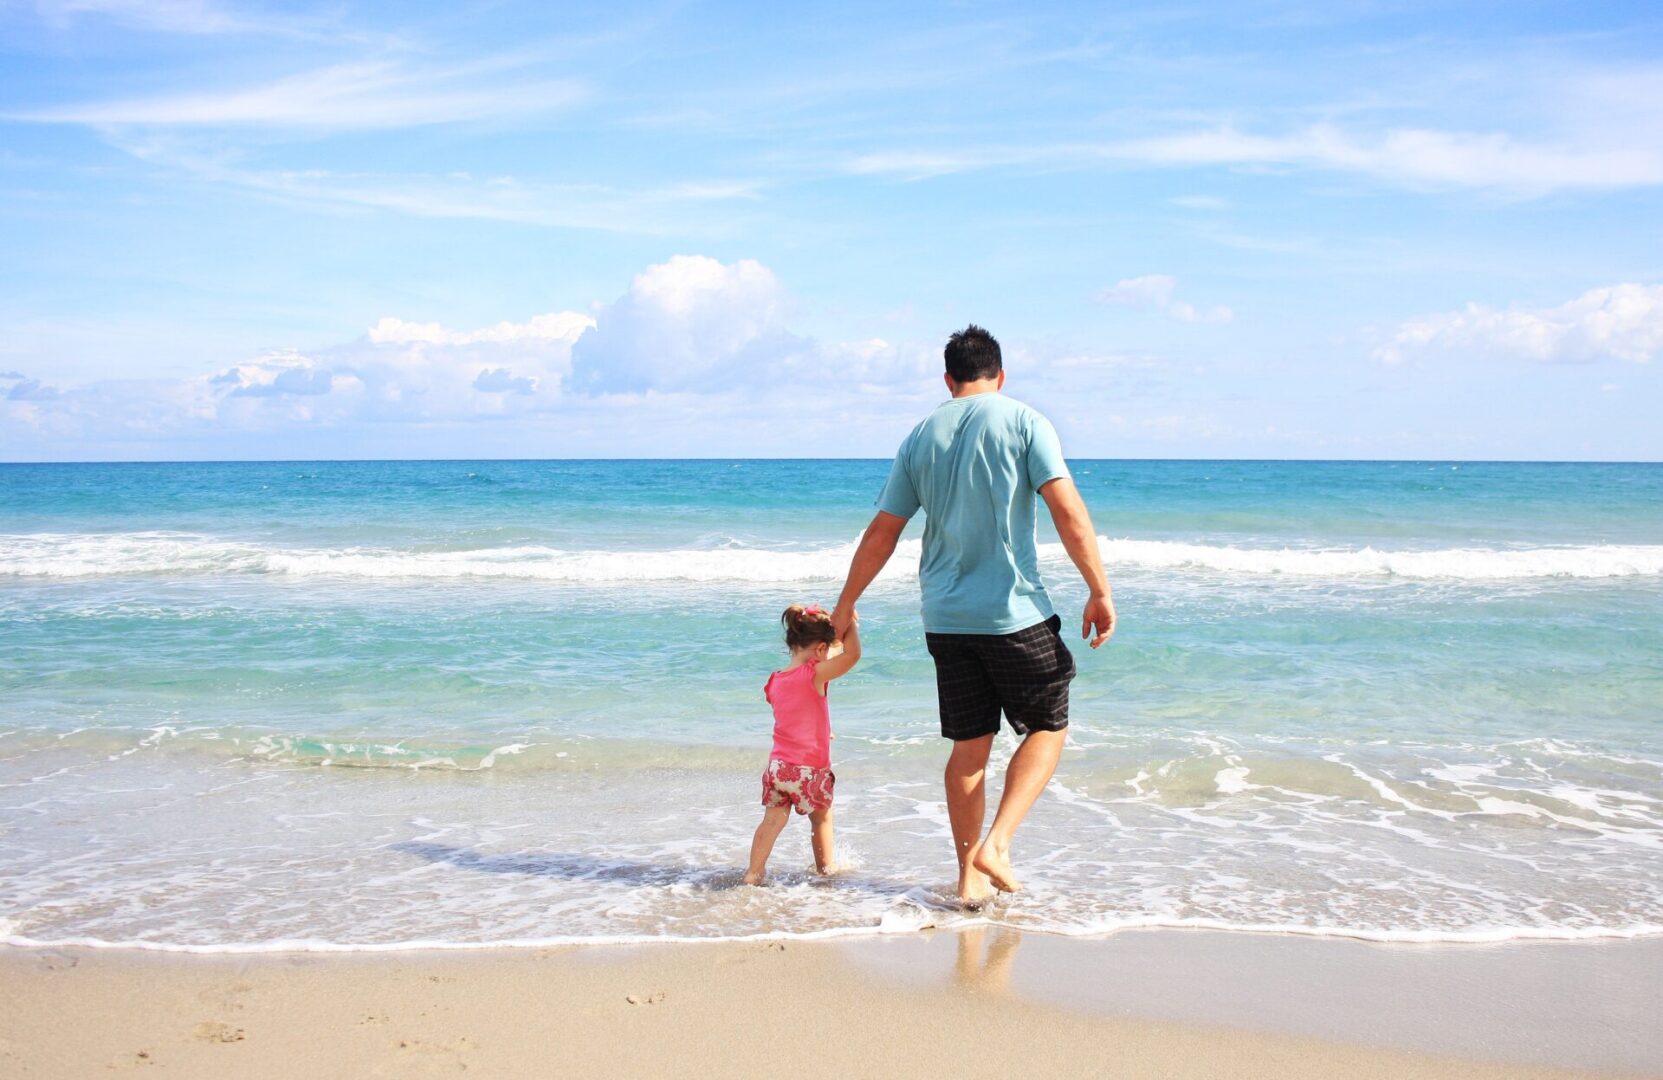 dad and daughter walking on the beach in the waves